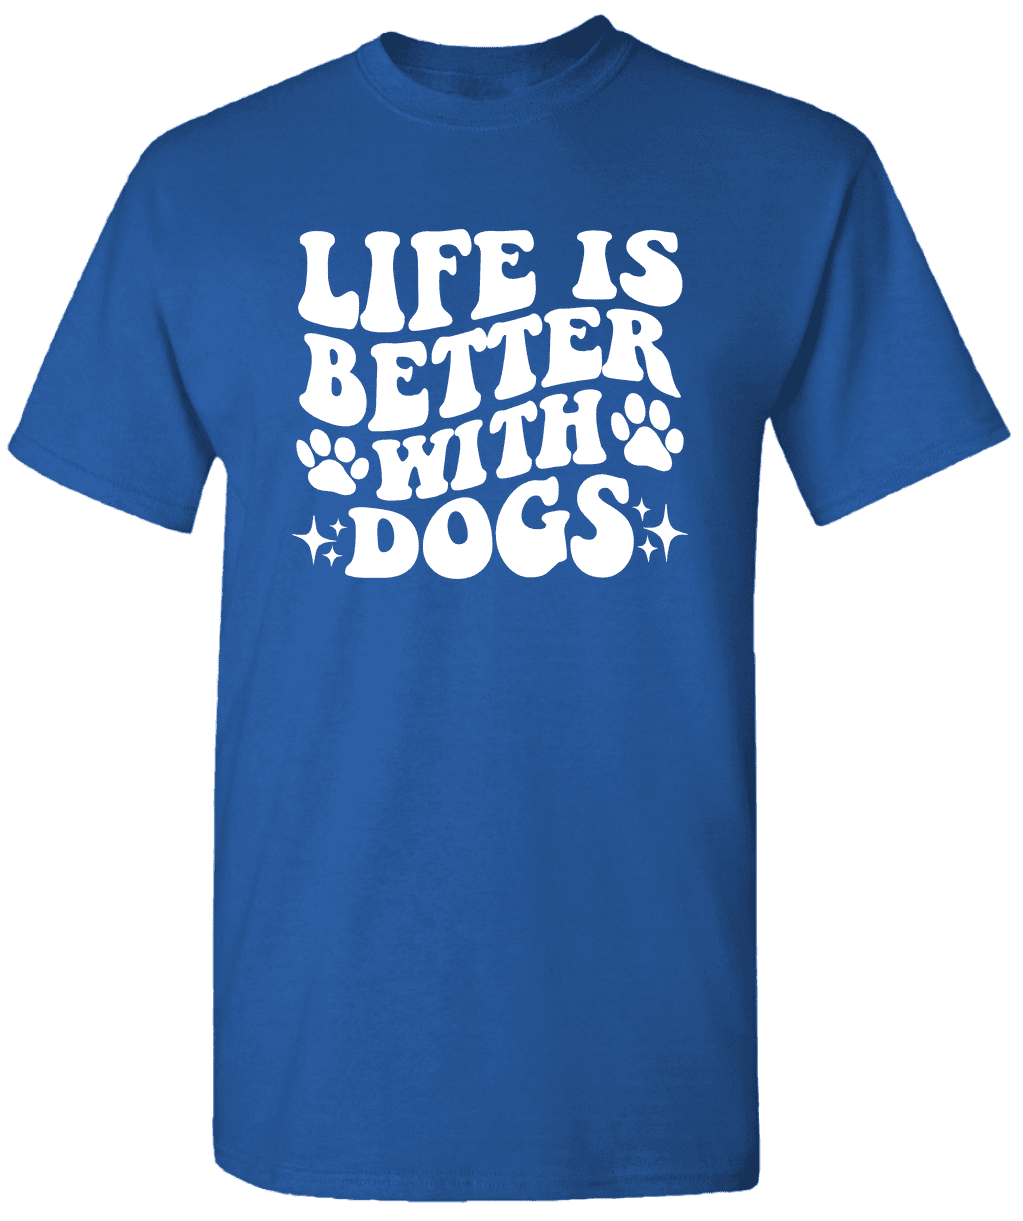 Life Is Better With Dogs Crazy Dog T-Shirts Womens Dog Lover Shirt ...